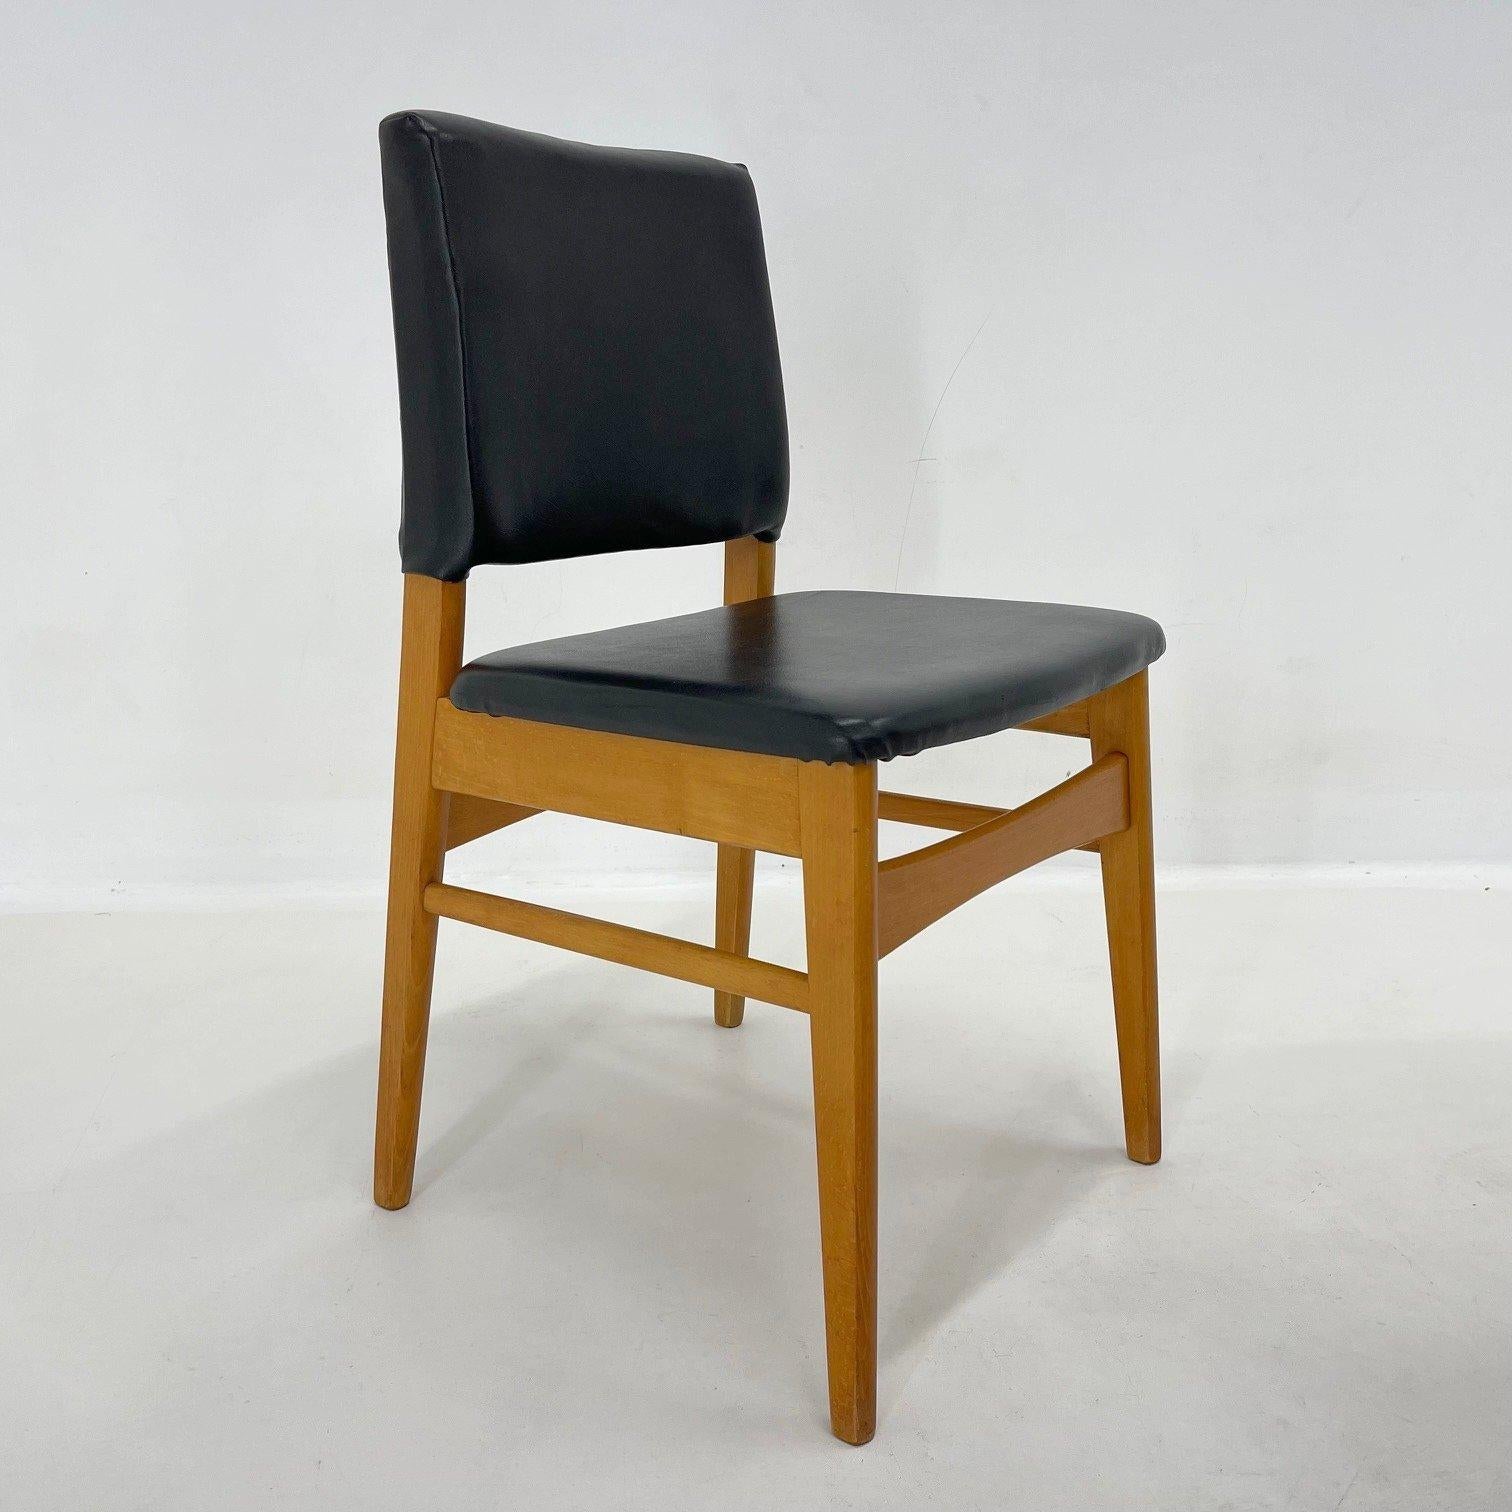 Set of 6 Leatherette & Wood Chairs, Czechoslovakia, 1960's For Sale 1